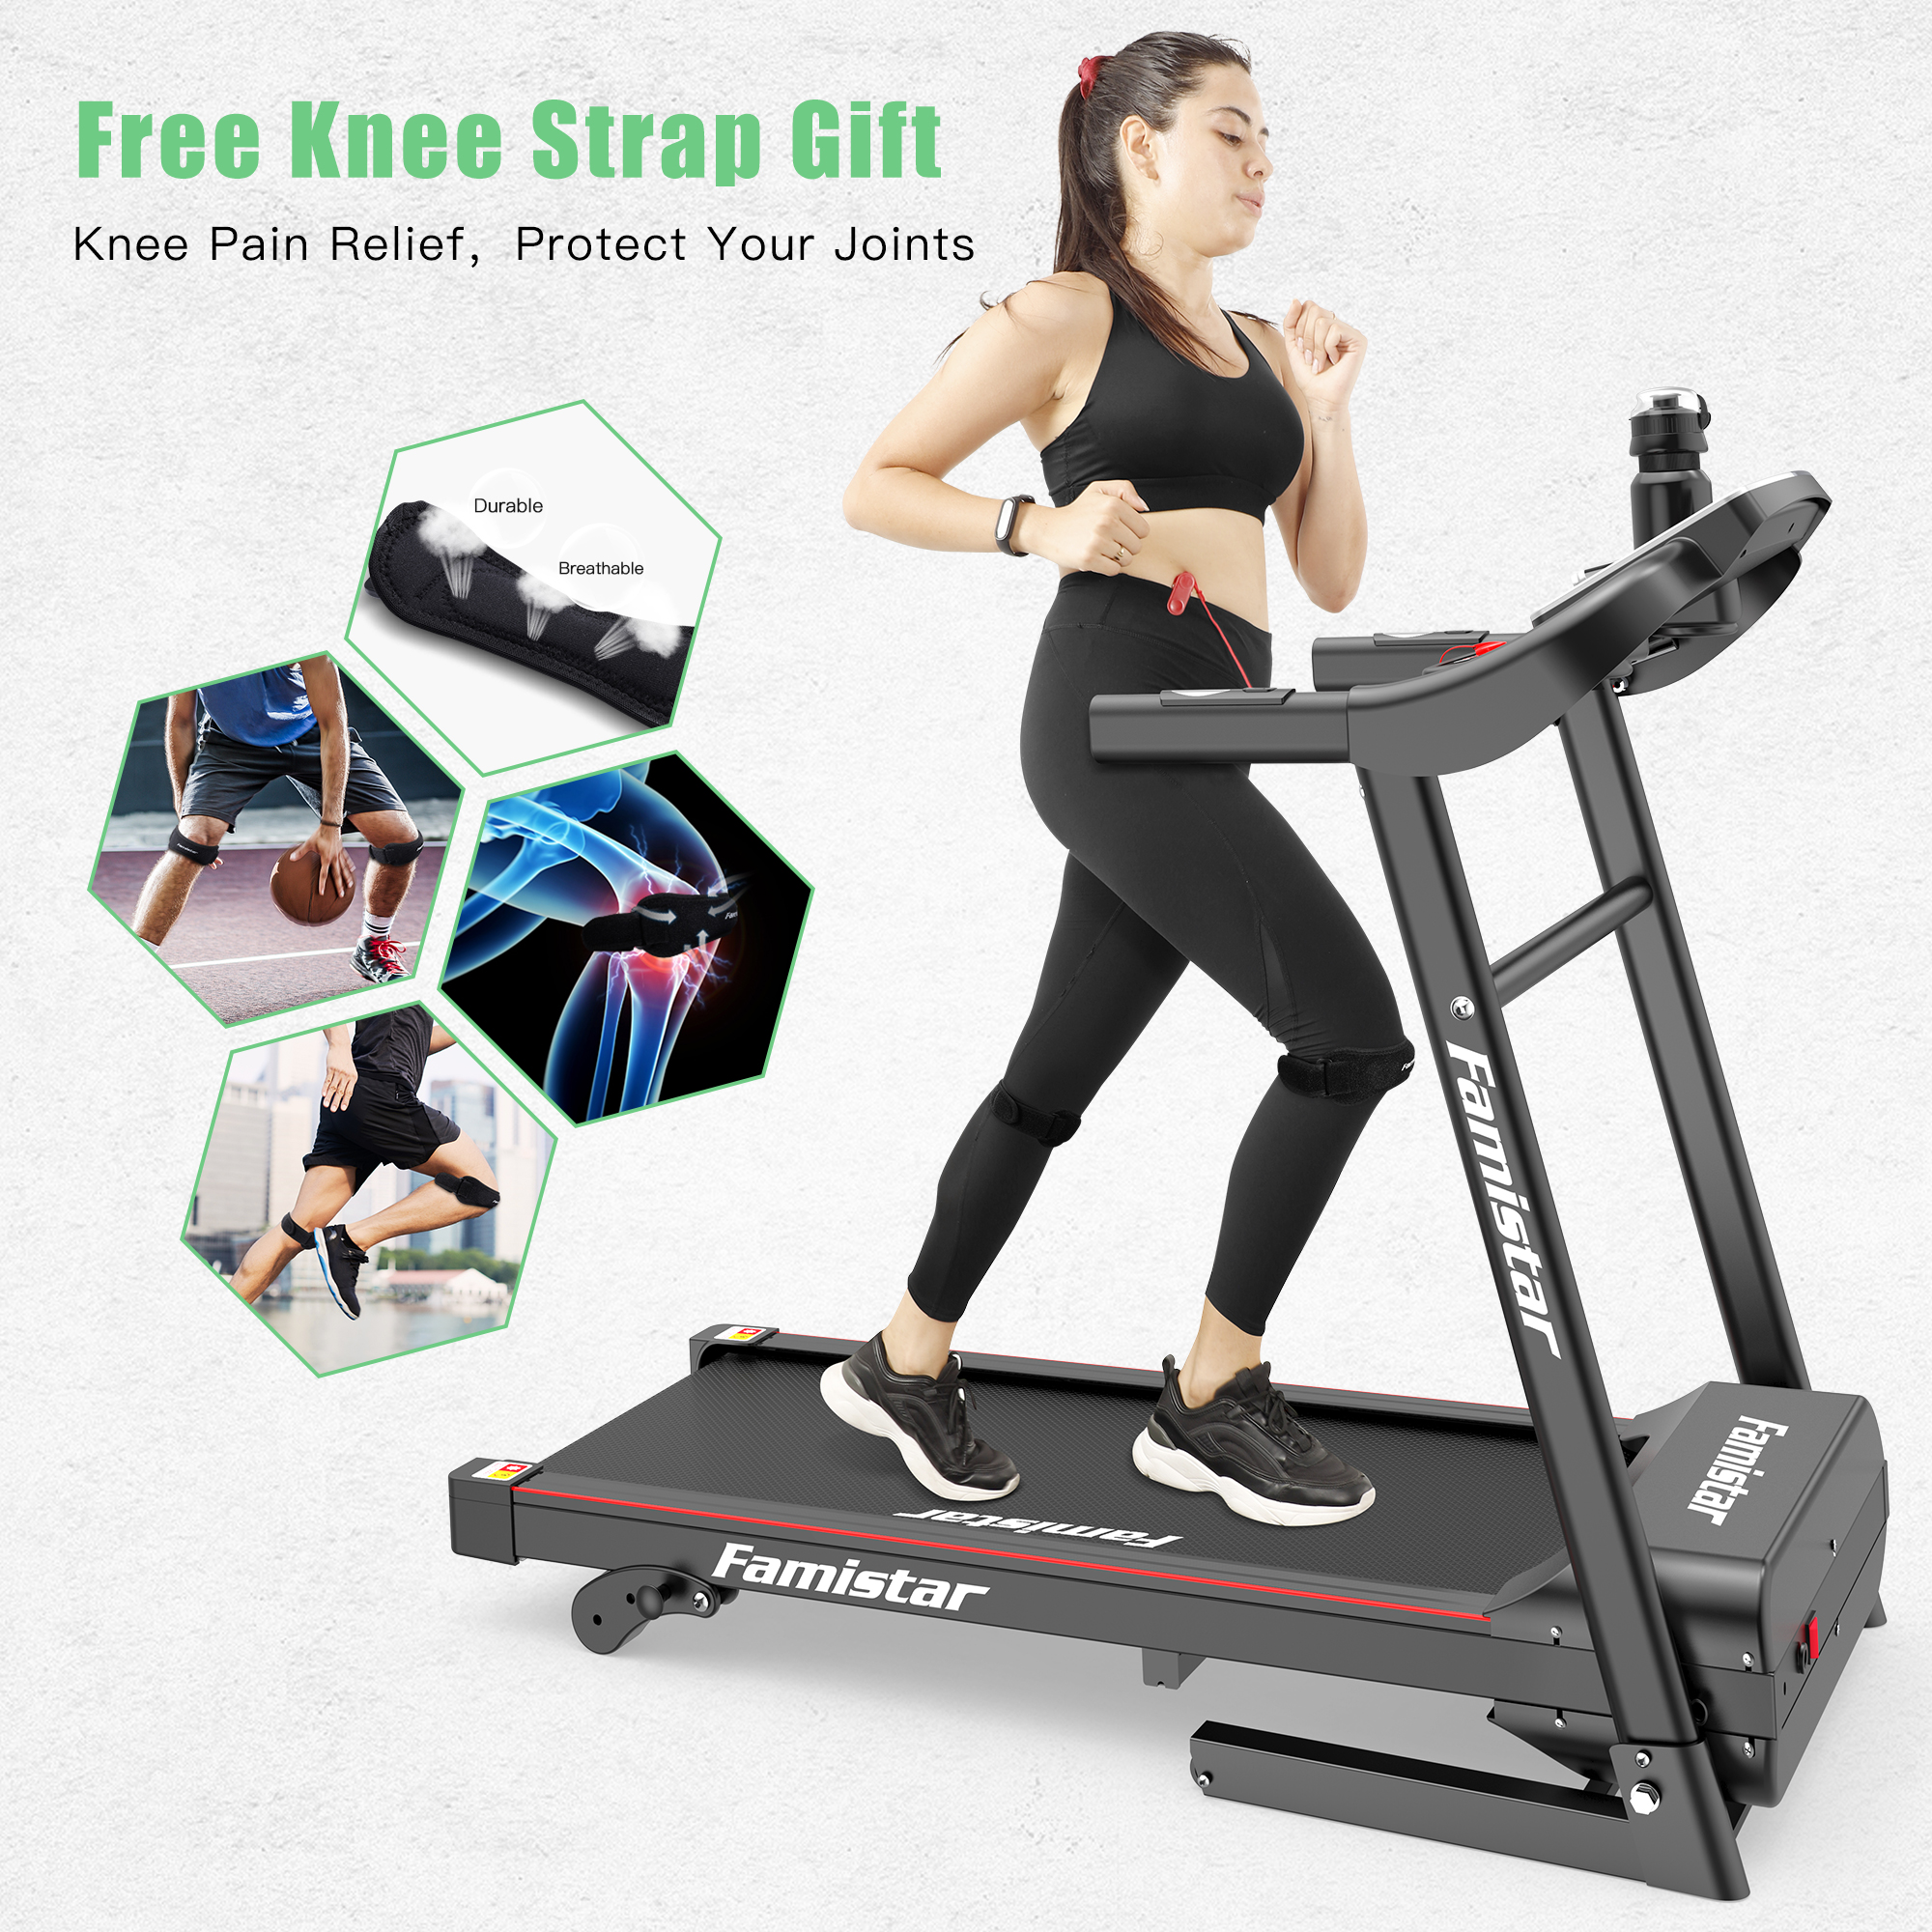 Famistar Folding Incline Treadmill for Home with Smart LCD Display, 265lbs, 12 Programs 3 Modes, MP3 Music Speaker, 2.5HP Electric Foldable Treadmill Running Machine, Knee Strap Gift - image 8 of 15